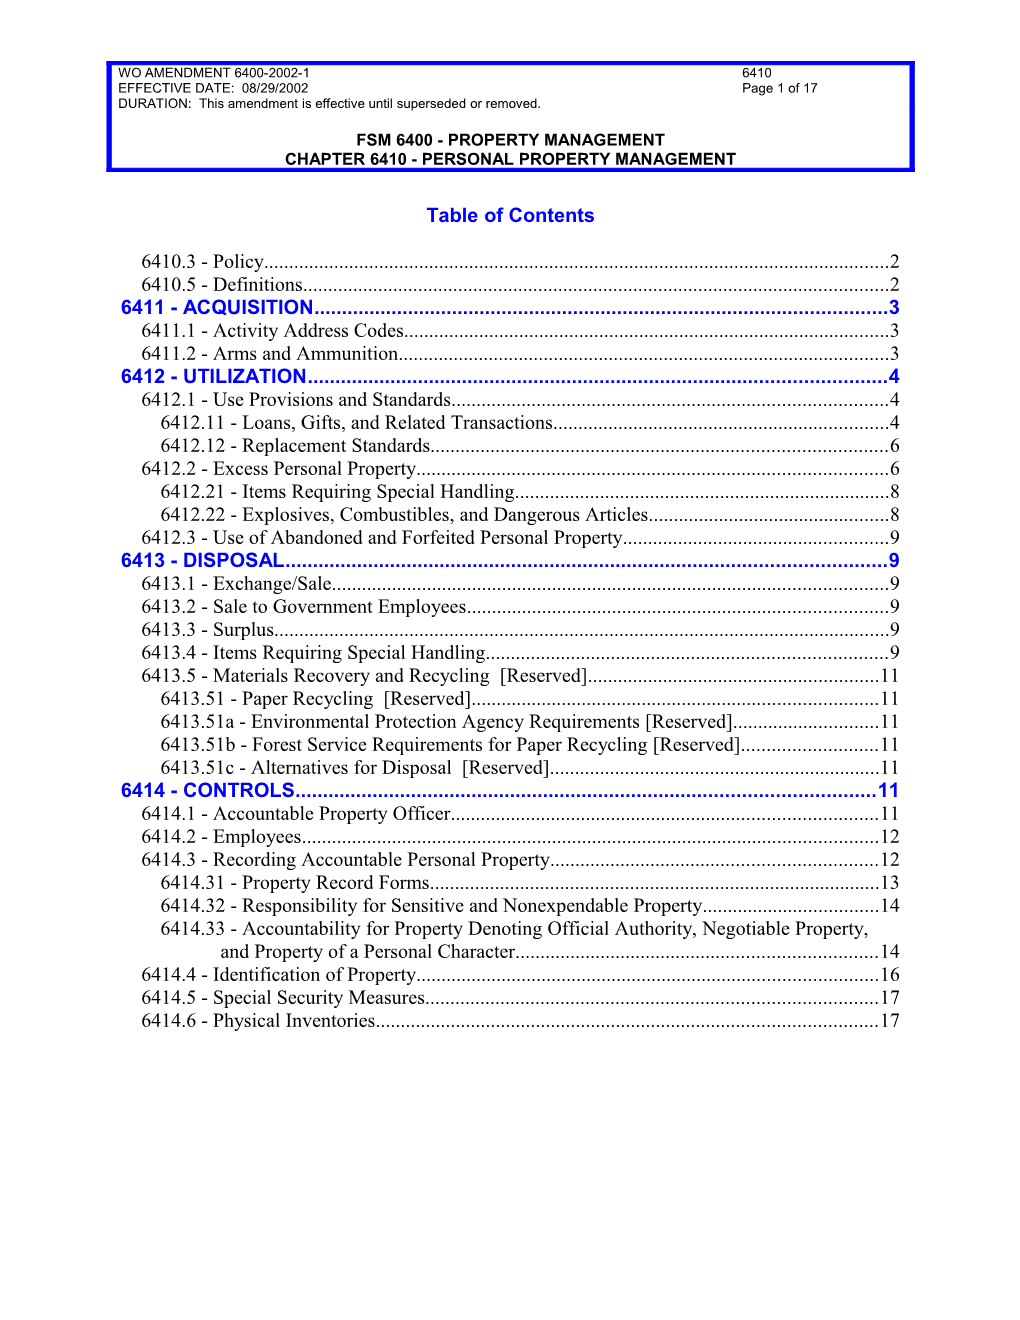 Table of Contents s241